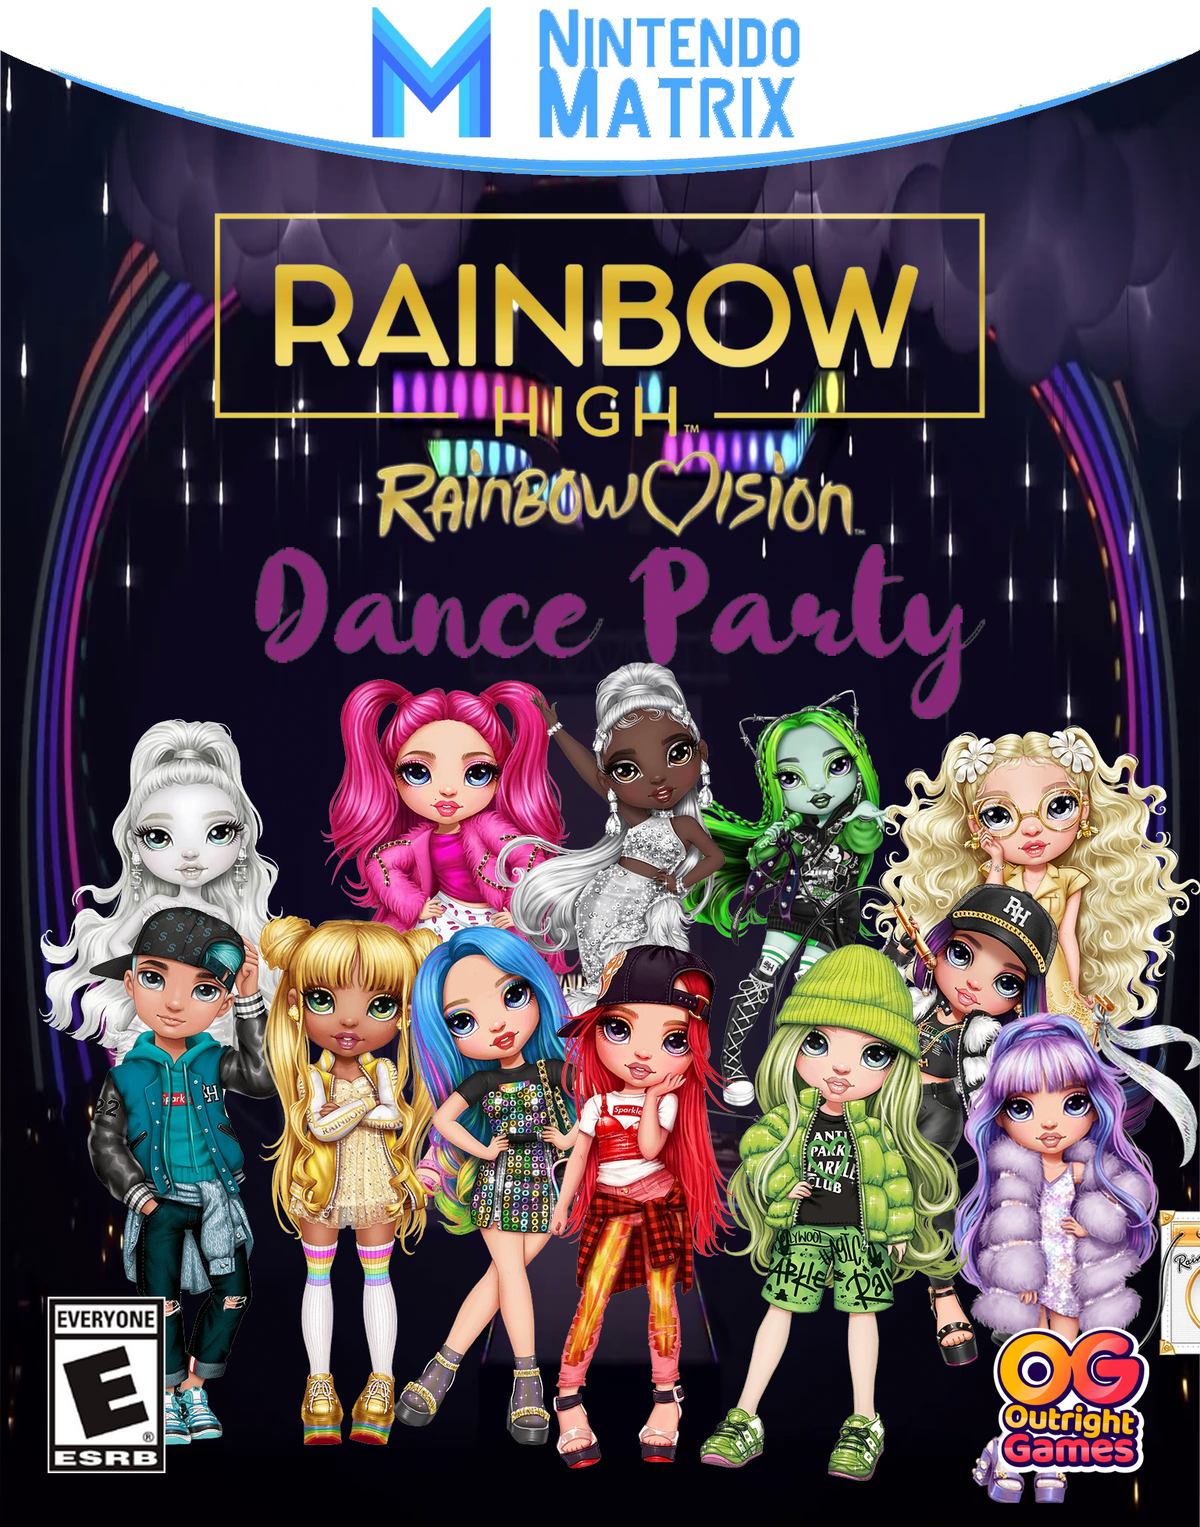 Rainbow High: Rainbow Vision Dance Party, Video Game Fanon Wiki